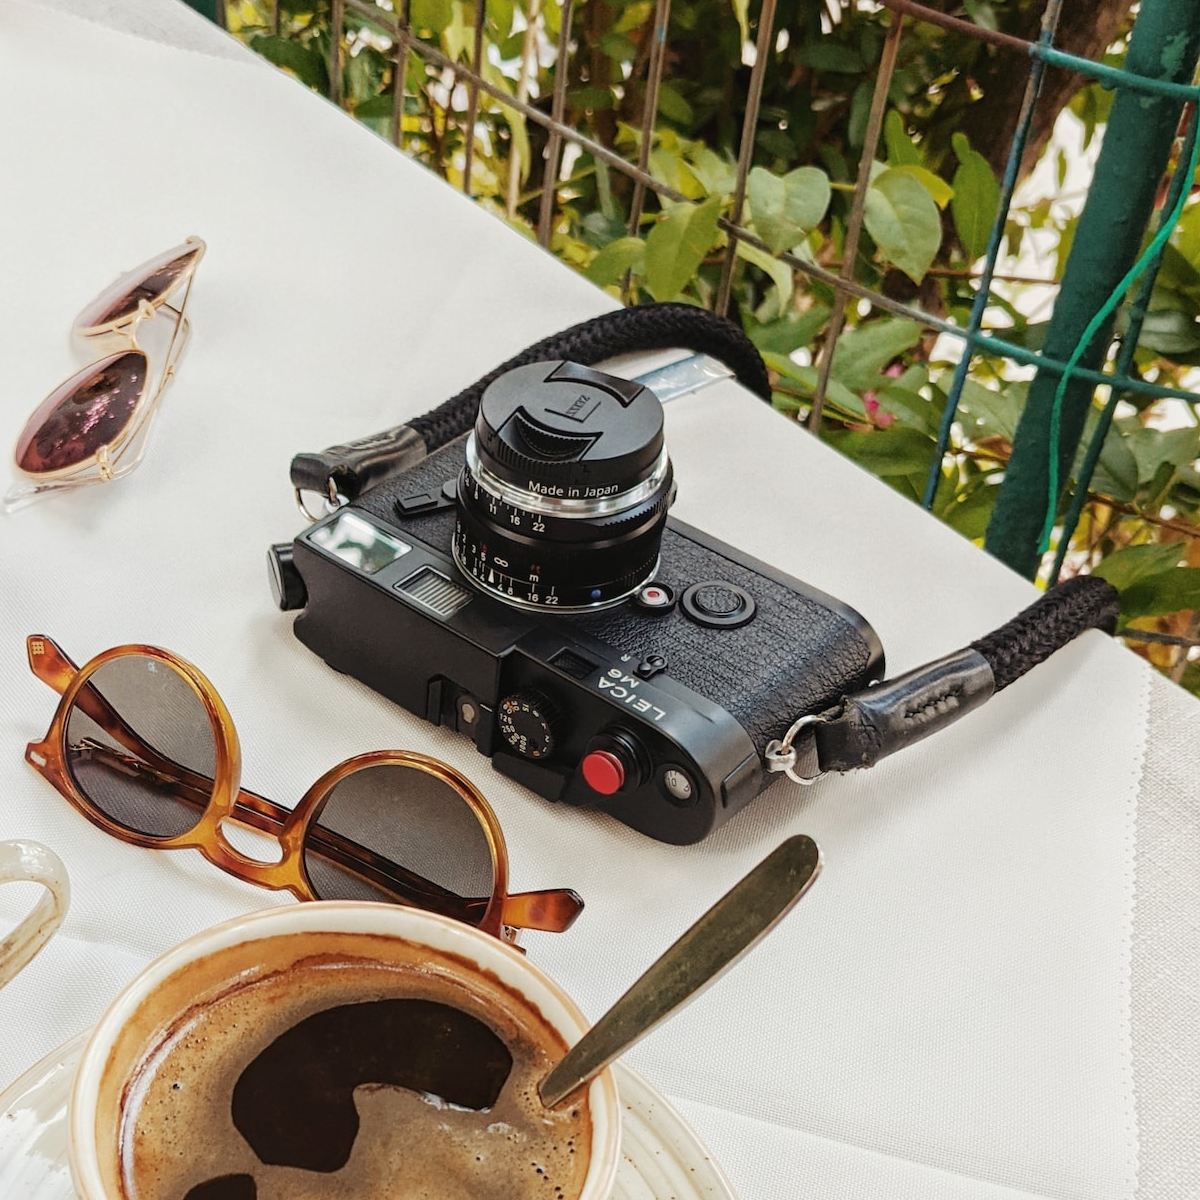 photo of leica m6 camera on table